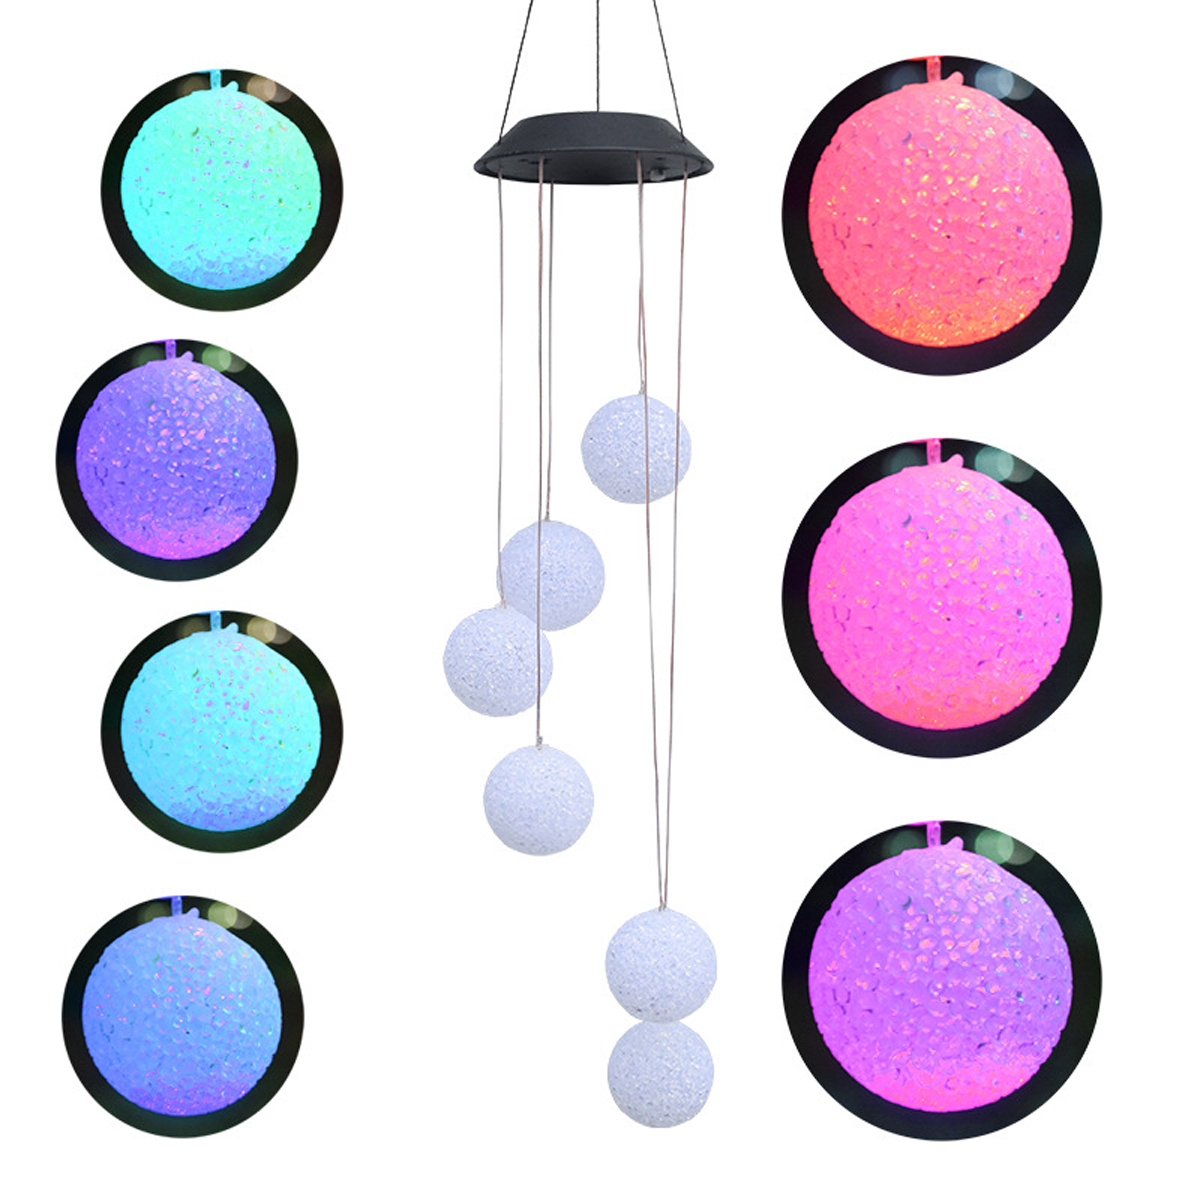 Aeolian-Hanging-Wind-Solar-LED-Lights-Chimes-Powered-String-Lawn-Garden-Lamp-1642749-5